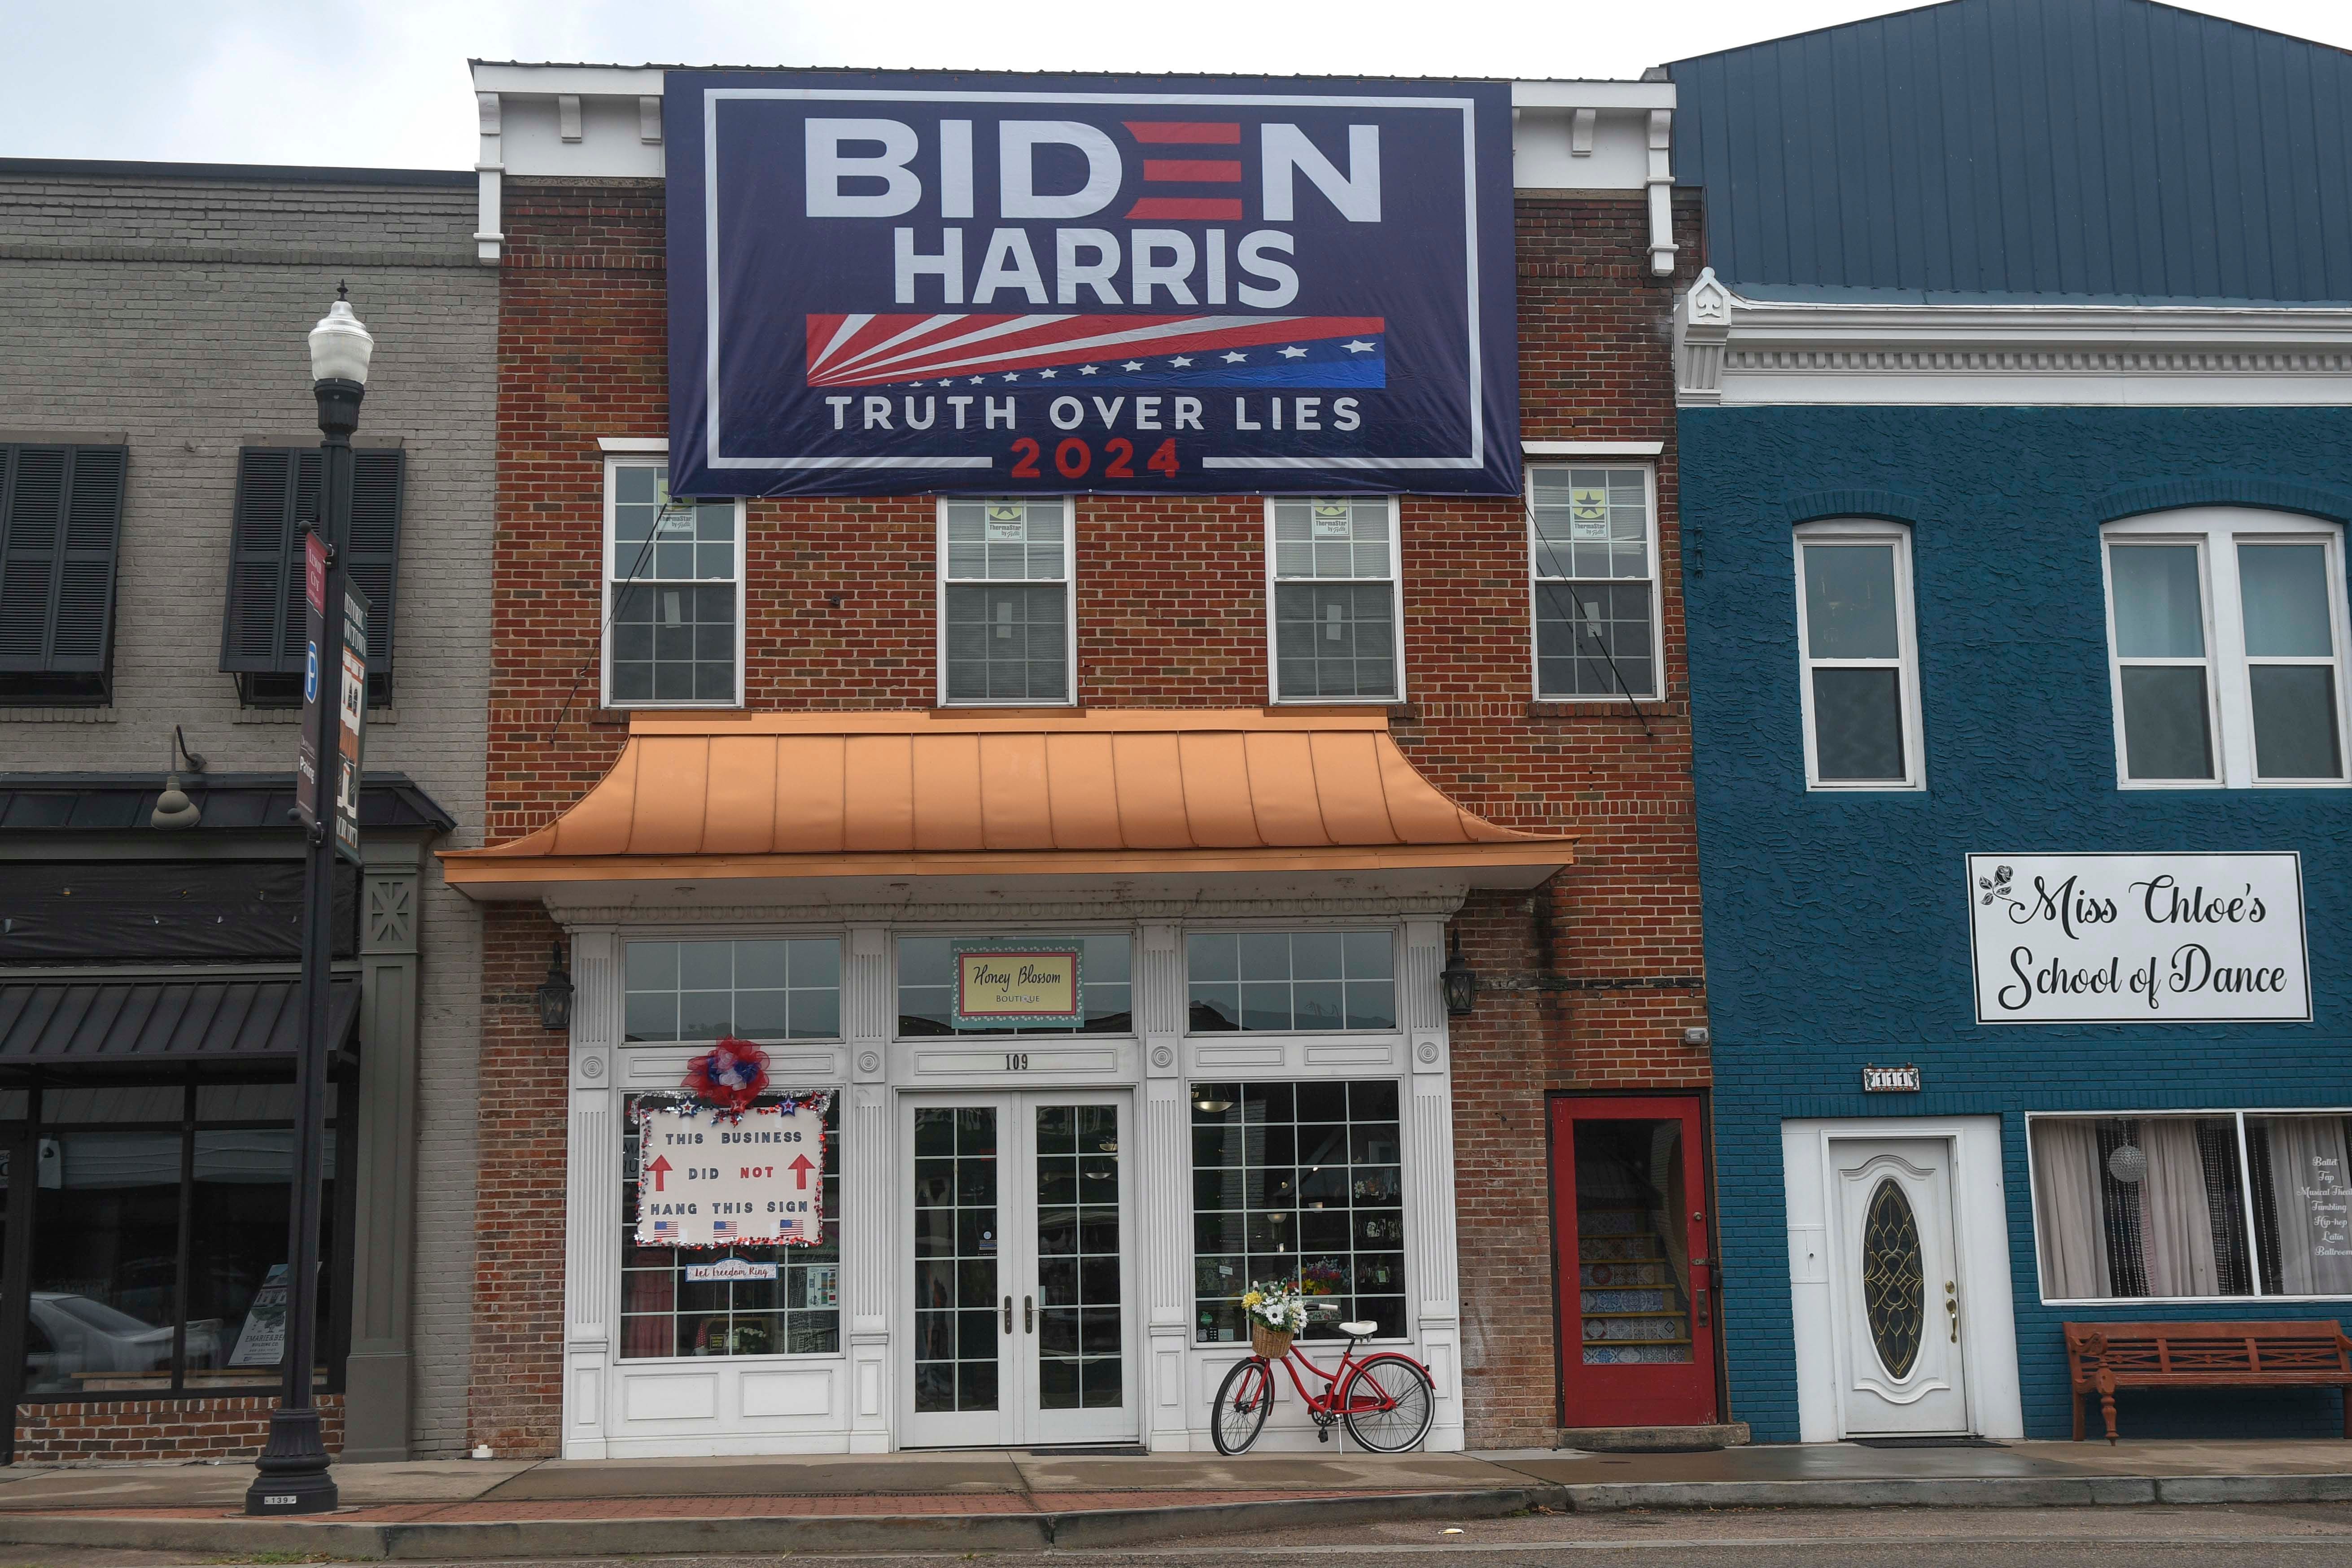 Lenoir City shop owner didn't ask for this massive Biden sign, and there's not much she can do